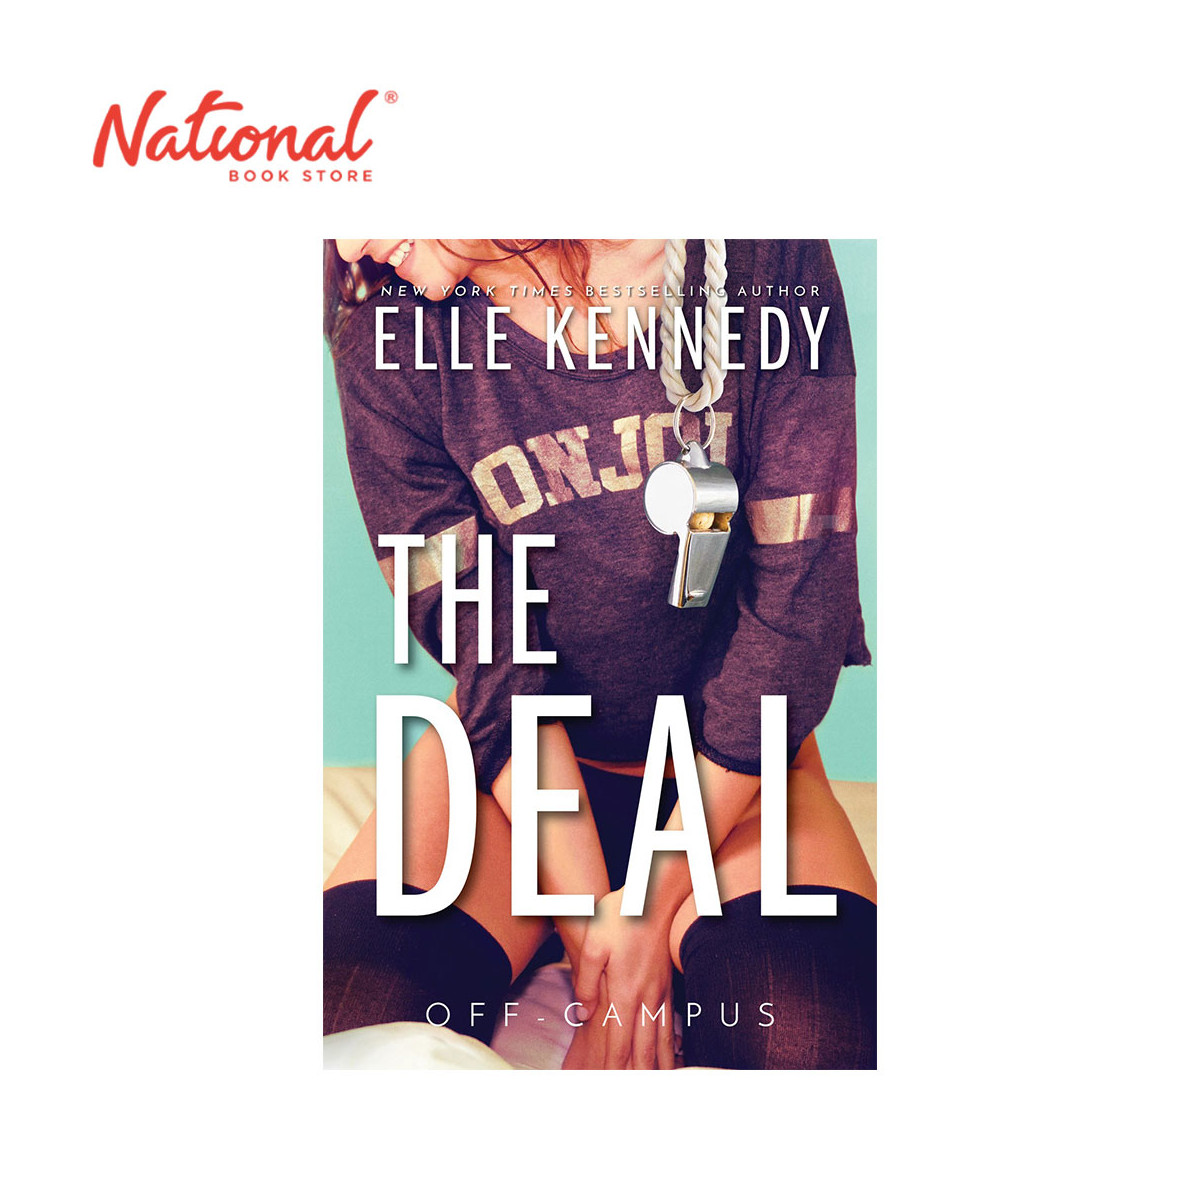 Off-Campus 1: The Deal by Elle Kennedy - Trade Paperback - Romance Fiction